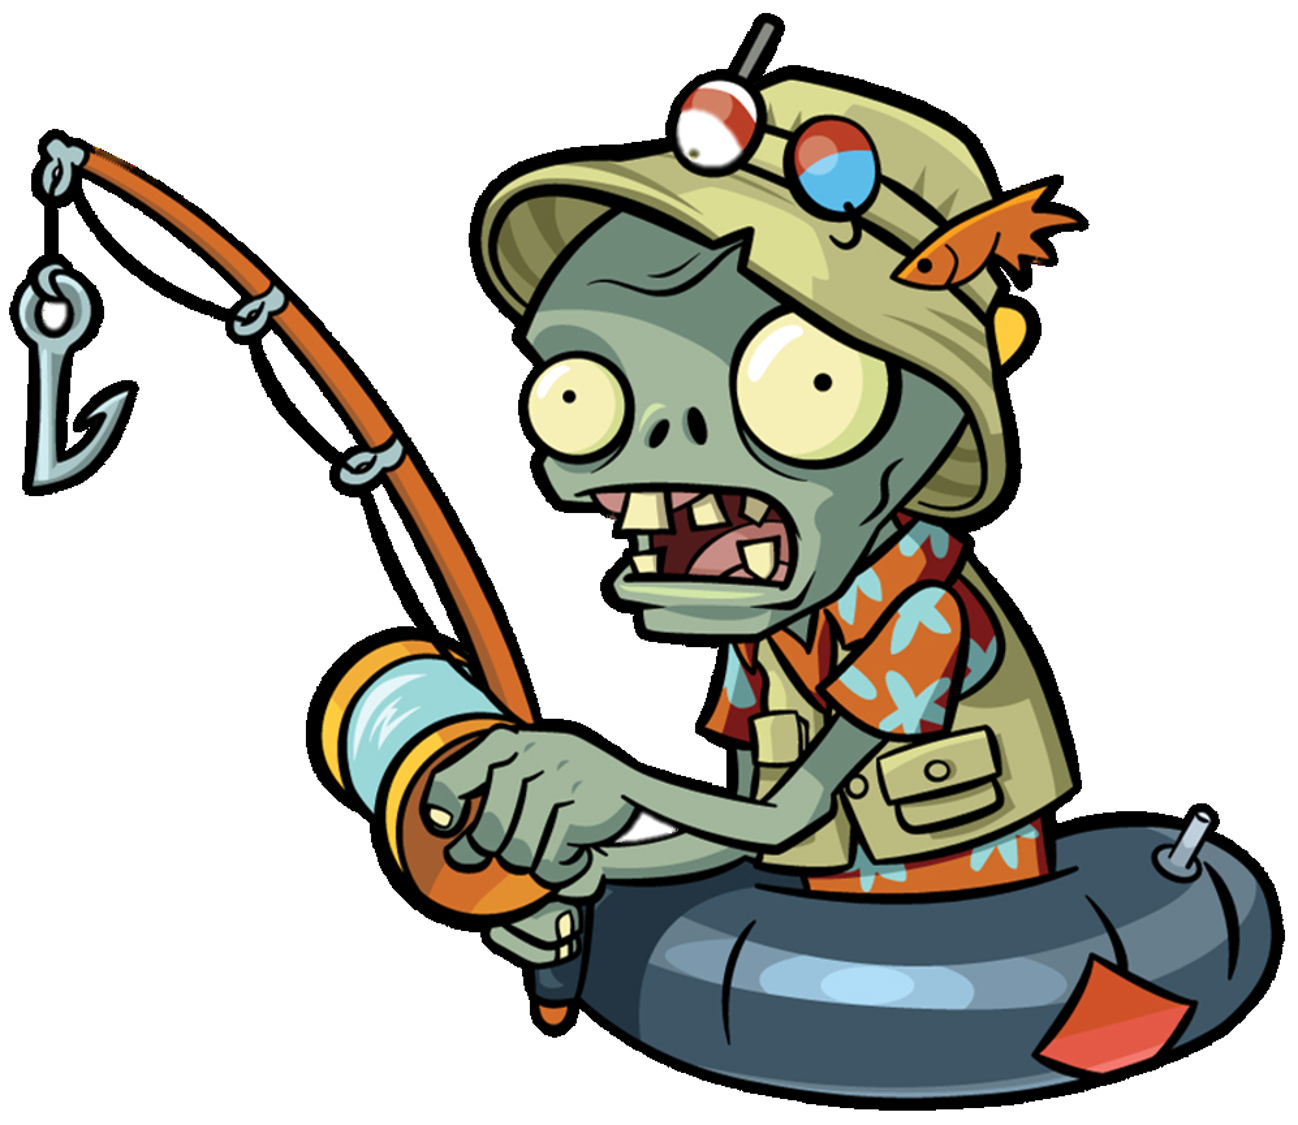 Image zombie png plants. Fisherman clipart fisherman indian